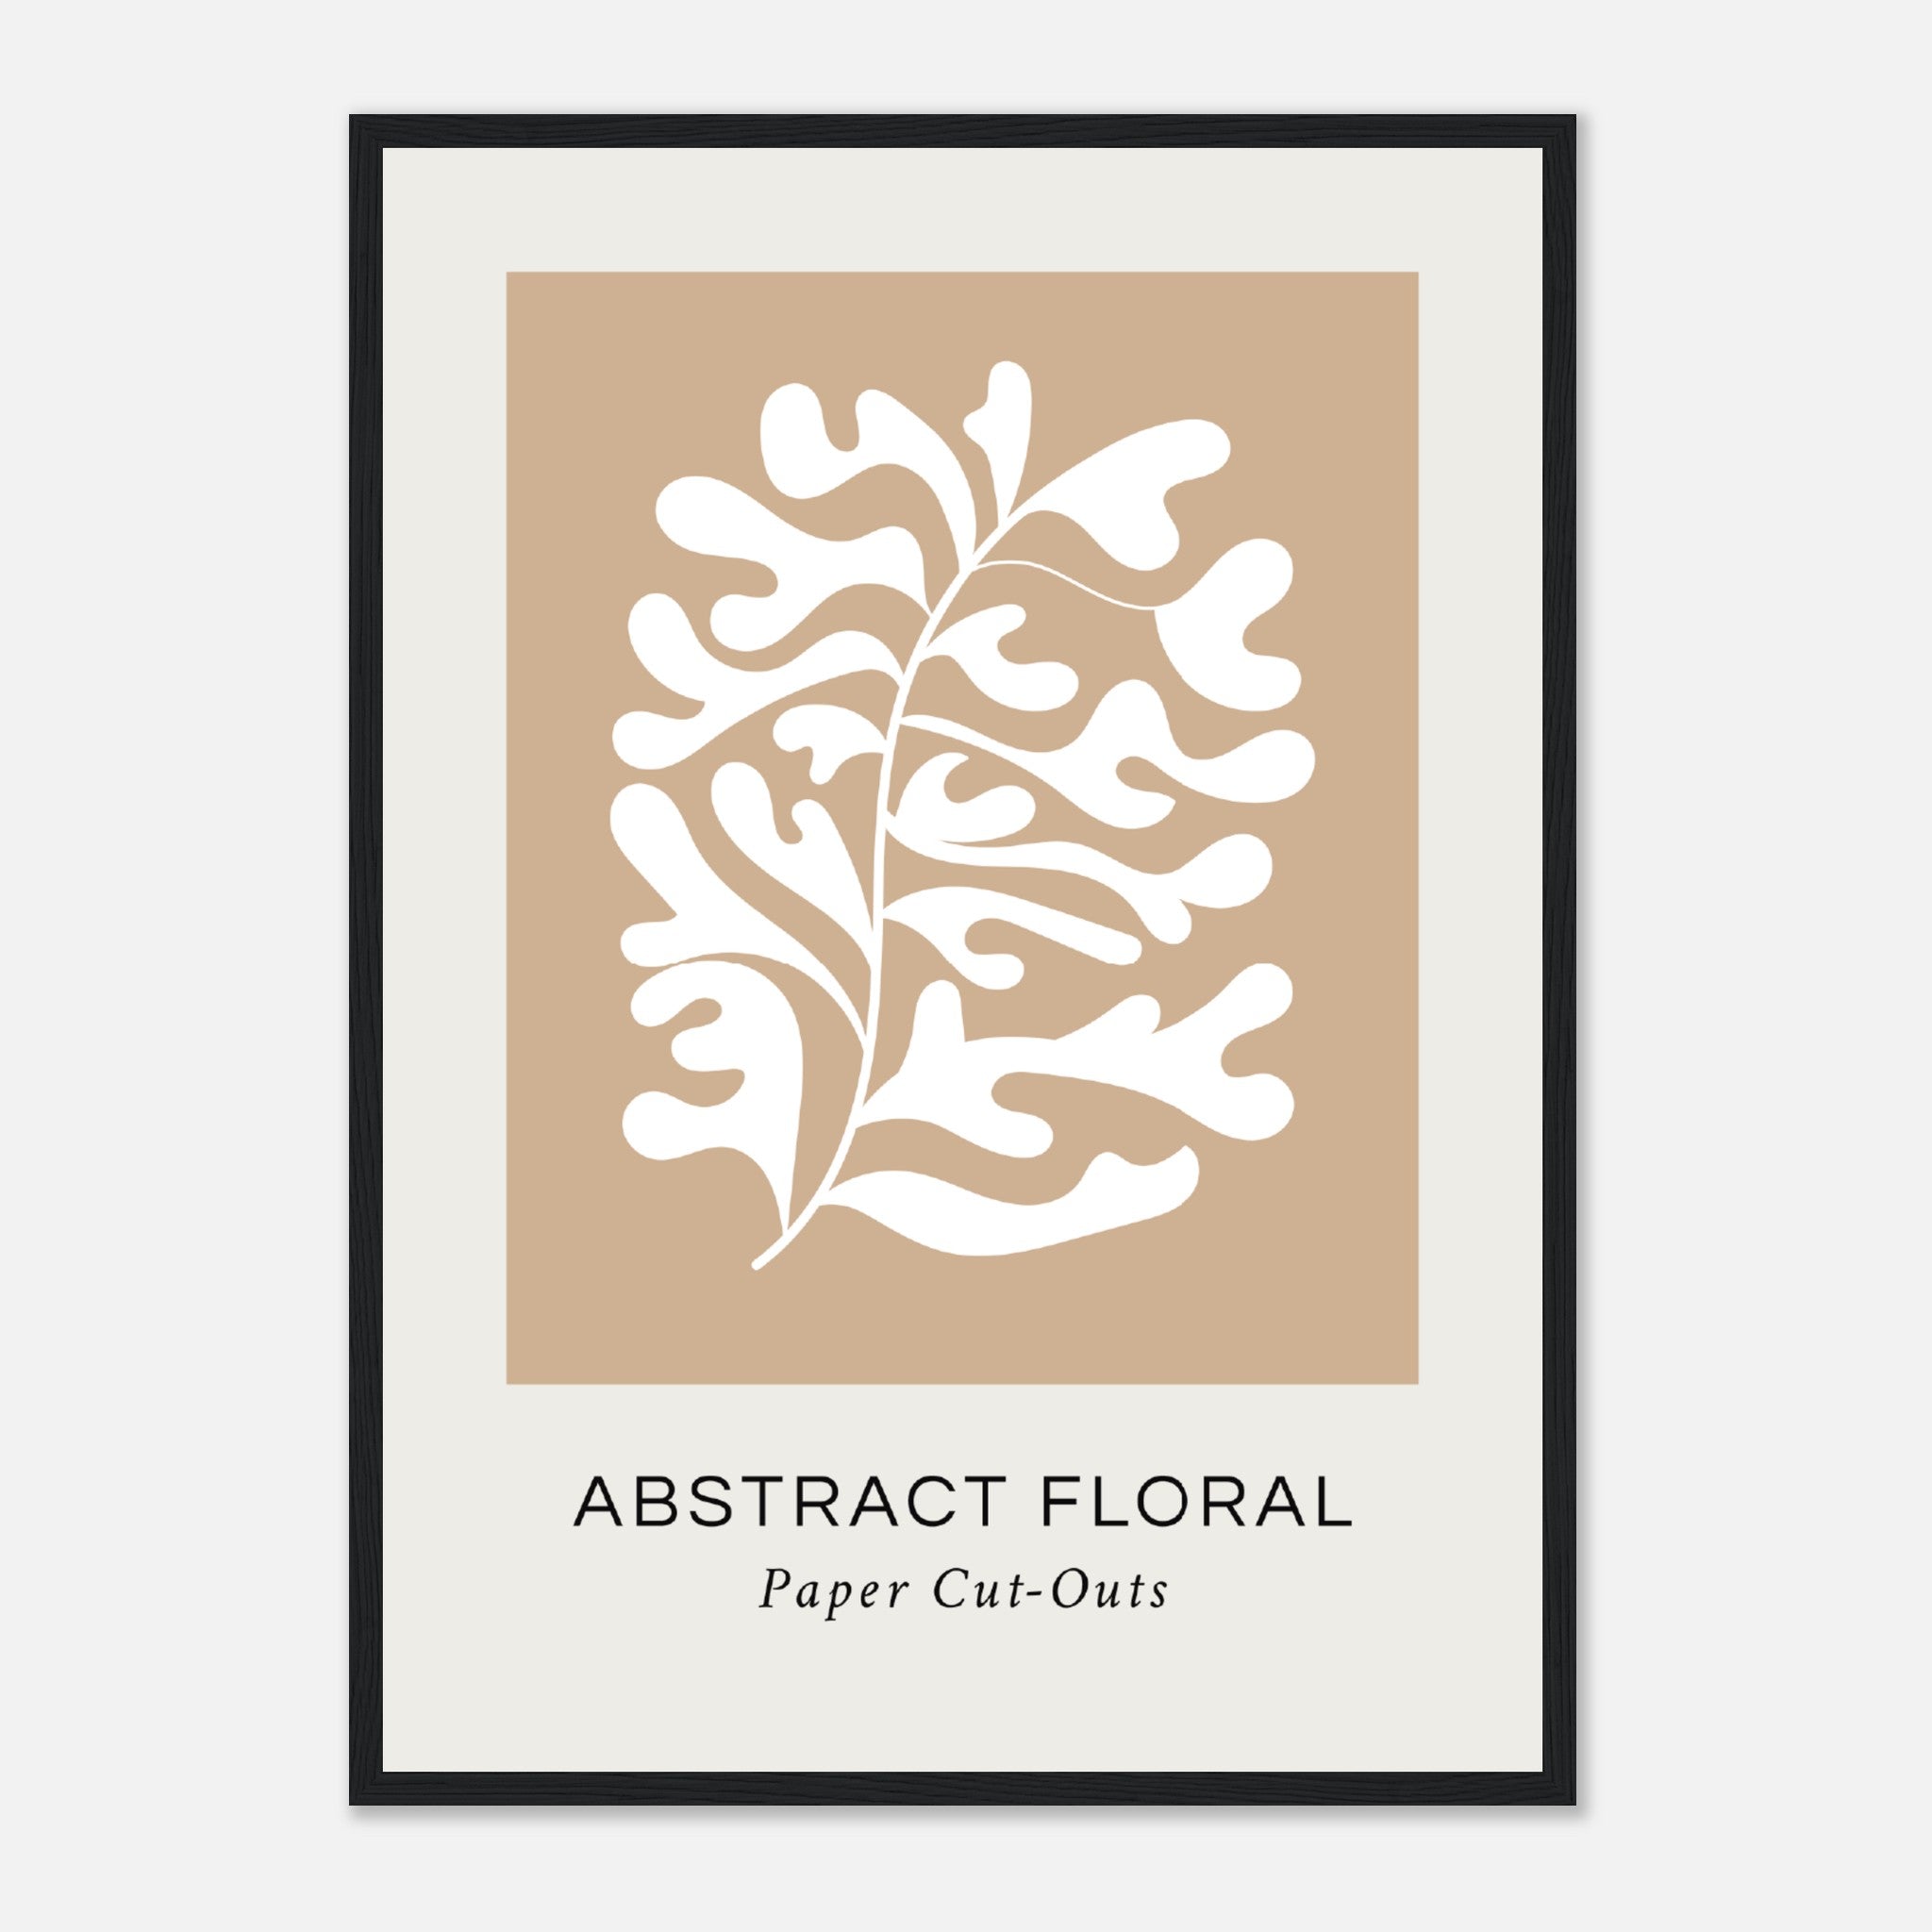 Abstract Floral Paper CutOuts 1 Poster